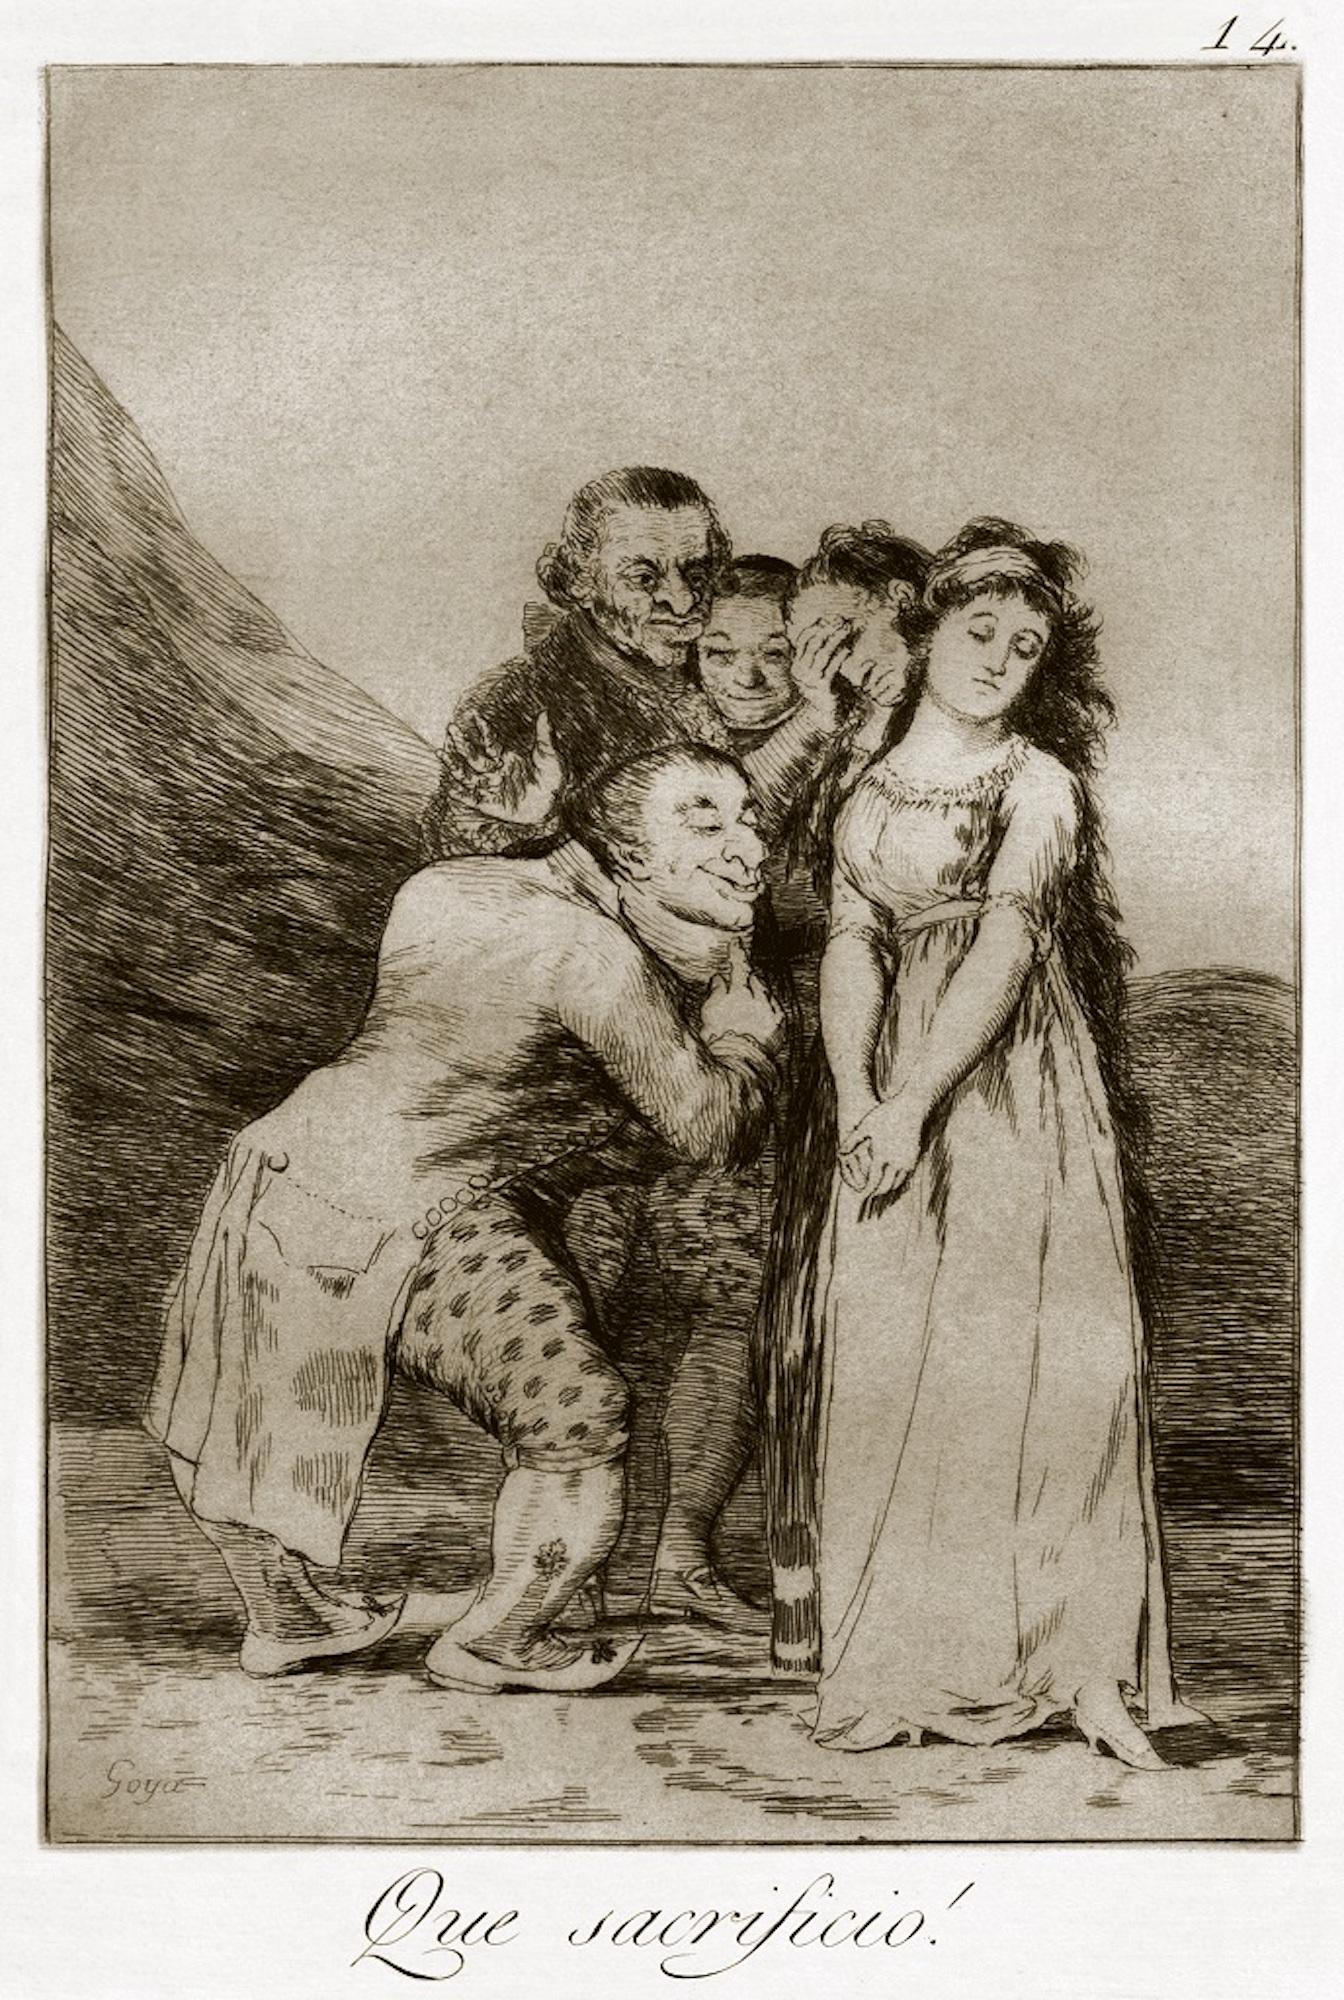 Que Sacrificio! is an original artwork realized by the Spanish artist Francisco Goya and published for the first time in 1799.

Original etching on paper.

The plate is part of the Third Edition of "Los Caprichos" that was published in 1868 by the